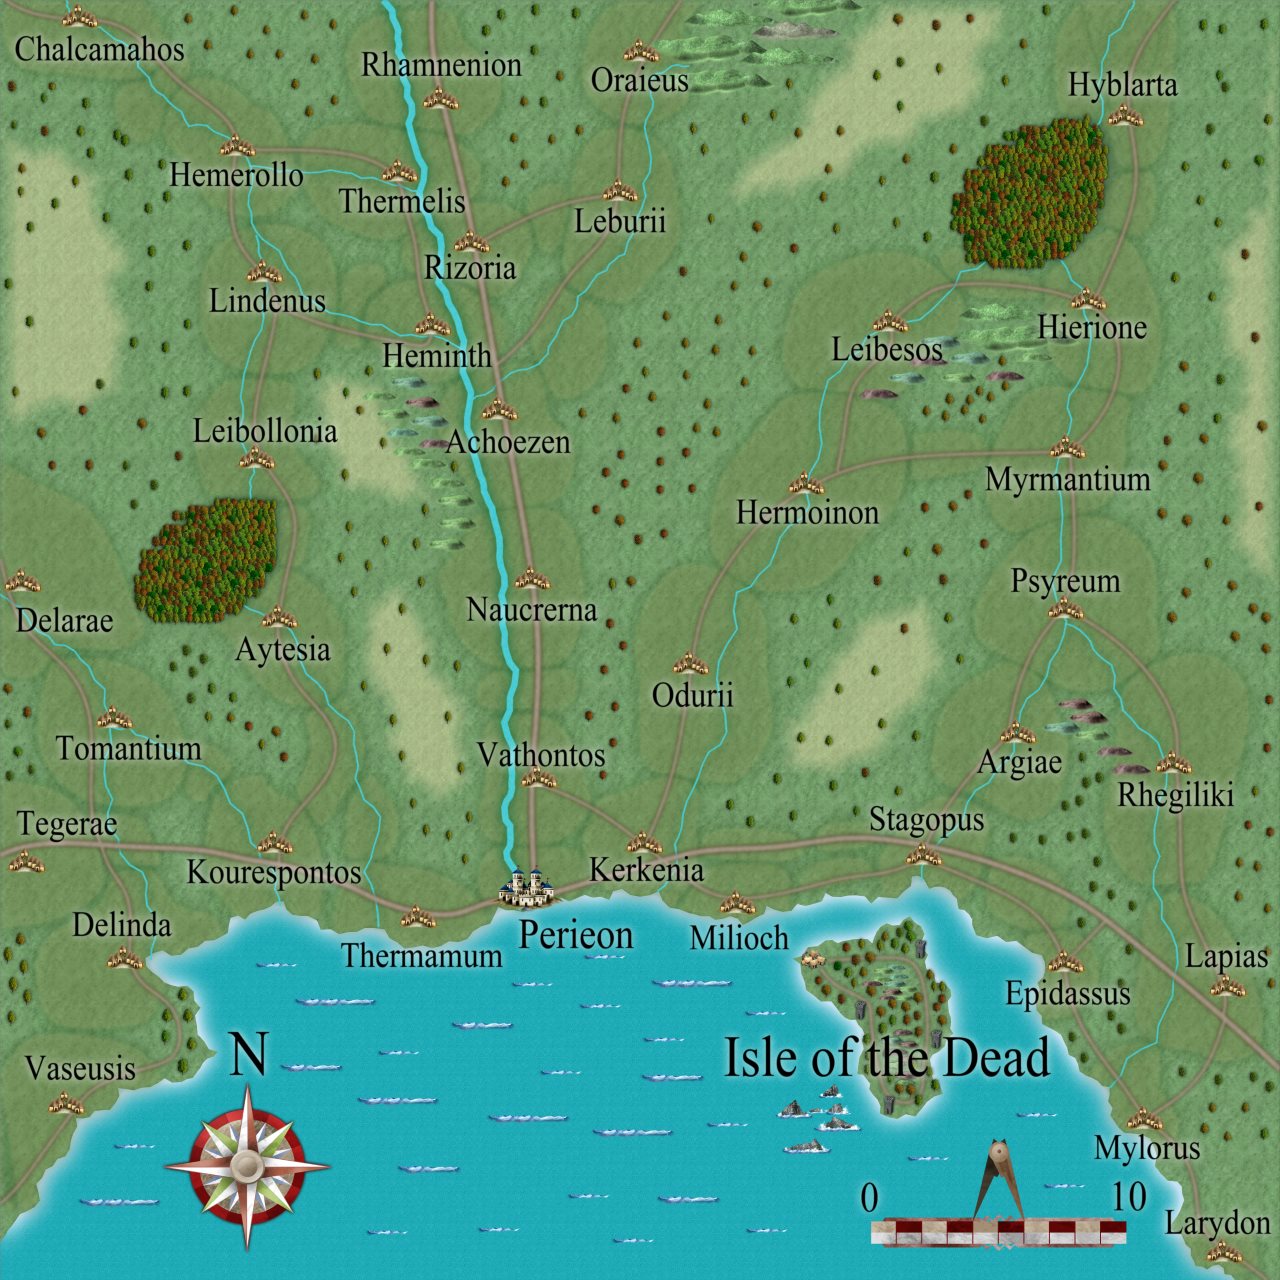 Nibirum Map: perieon environs by Simon Proctor